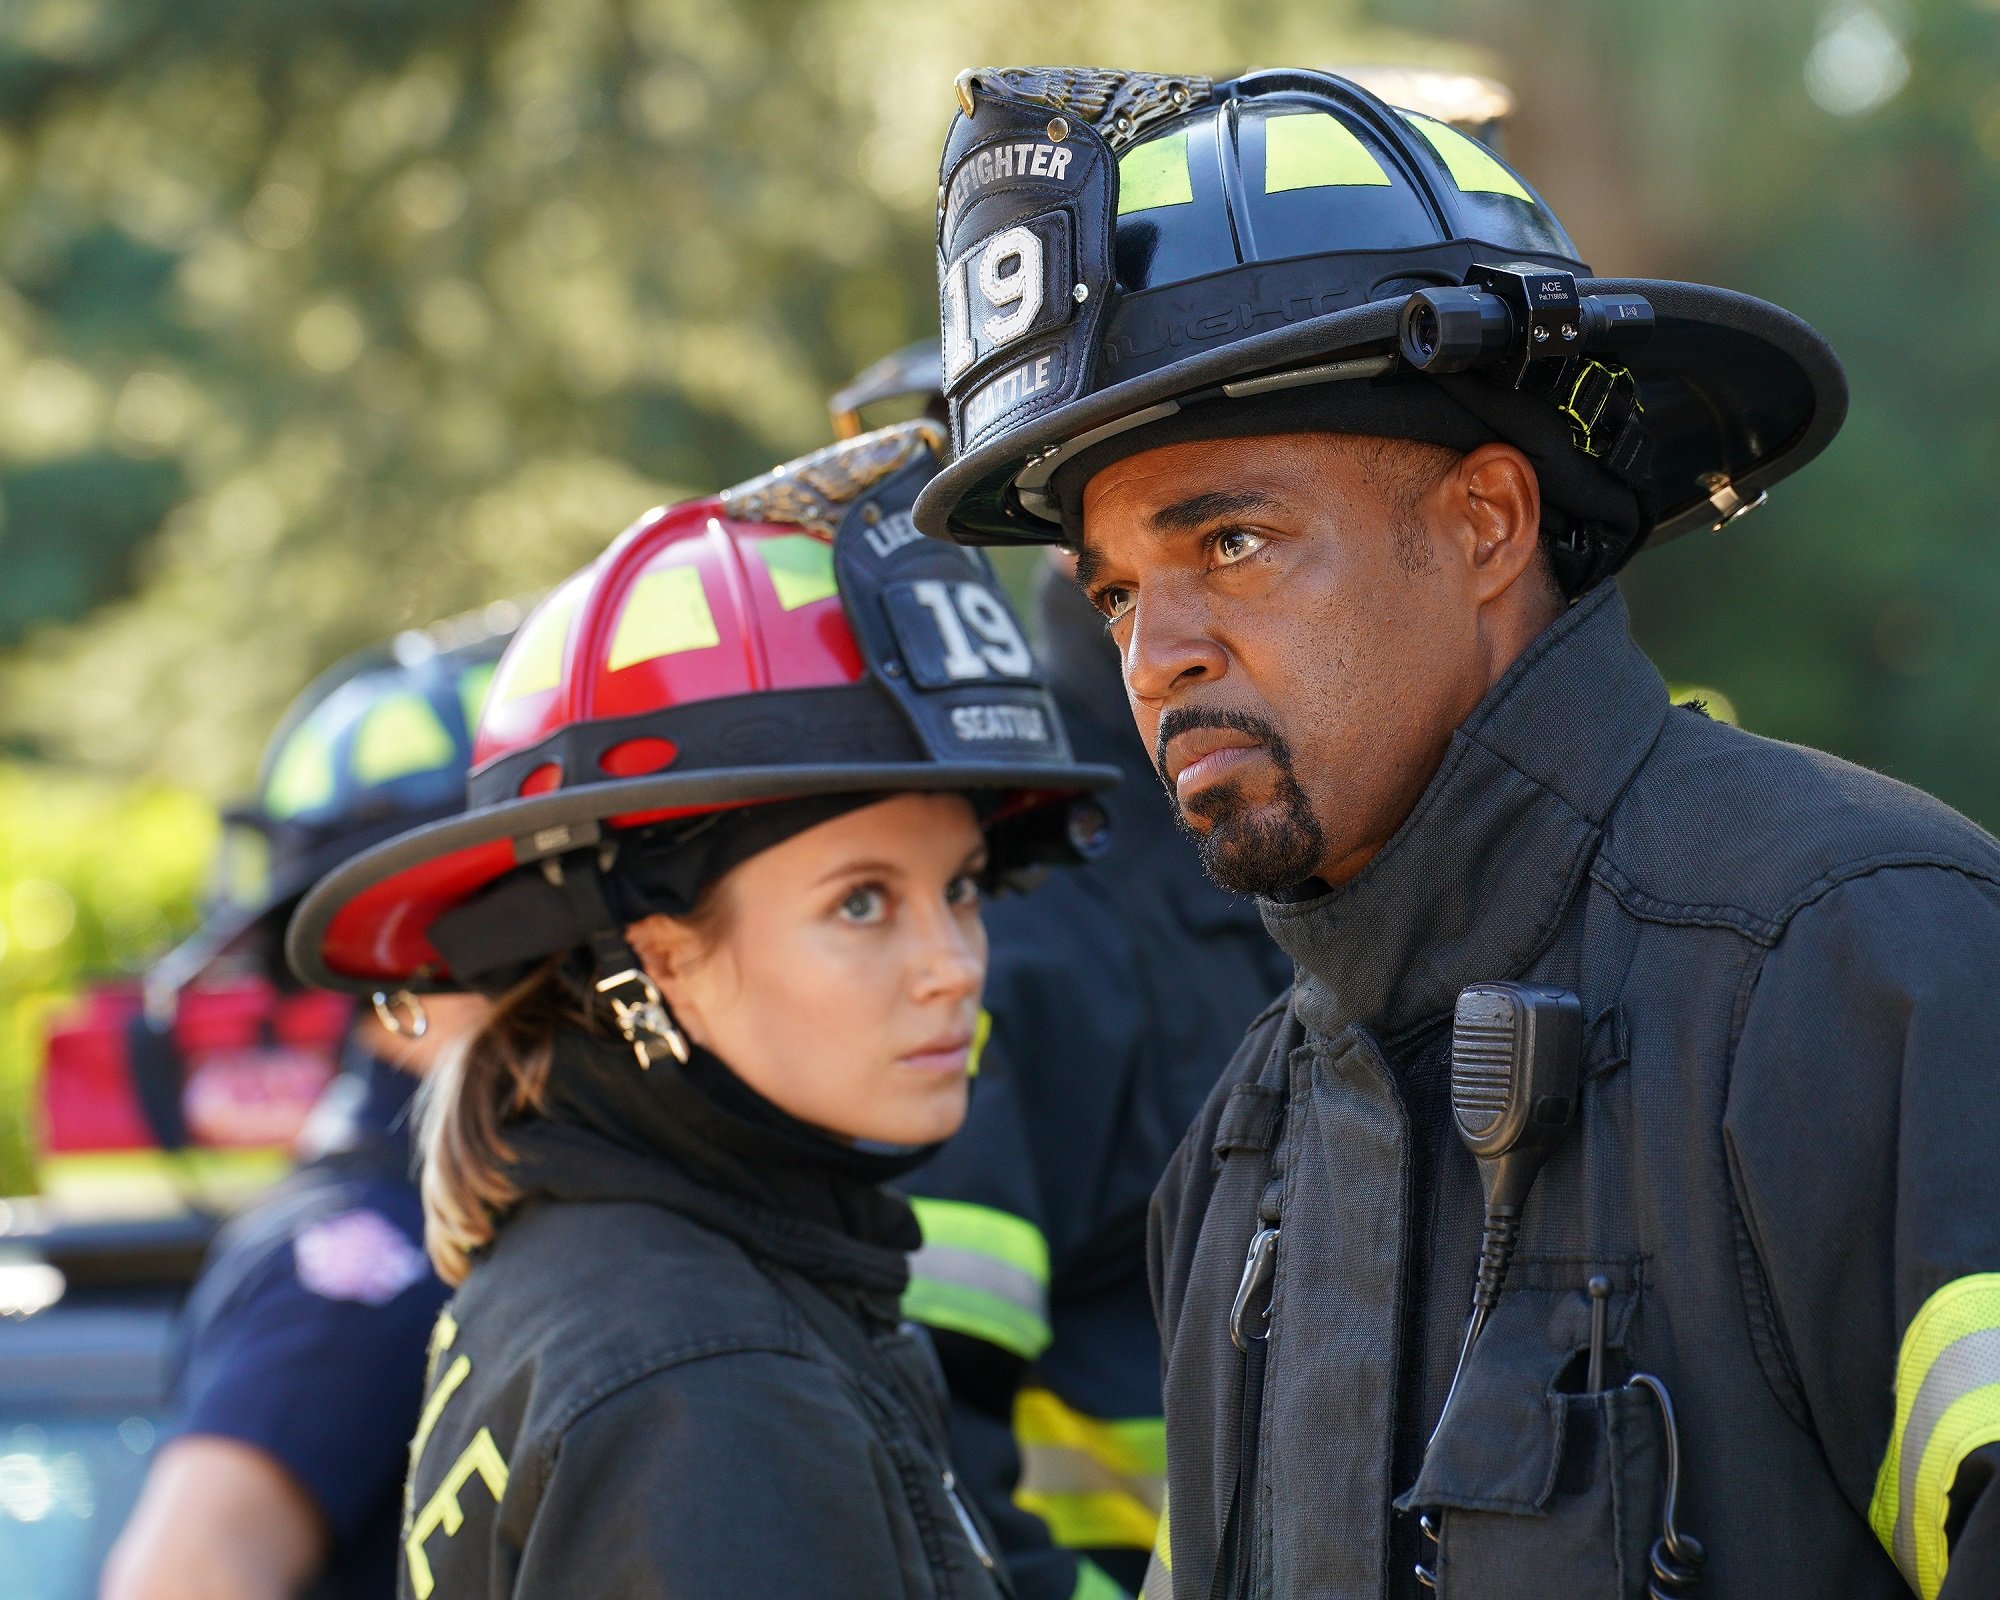 'Station 19' Season 6 cast members Danielle Savre and Jason George playing Maya Bishop and Ben Warren respectively